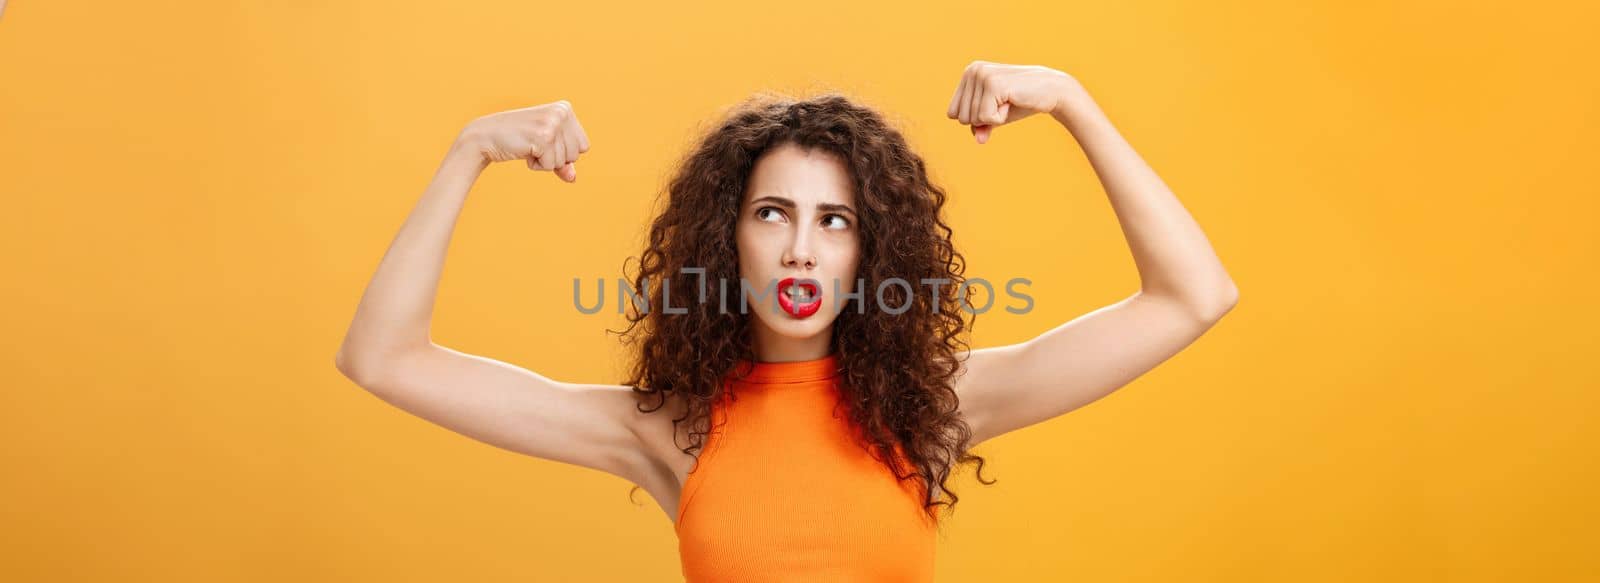 Woman feeling powerful and strong raising hands. with clenched fists making intense face being working out in gym showing muscles and biceps looking at upper right corner posing over orange background.